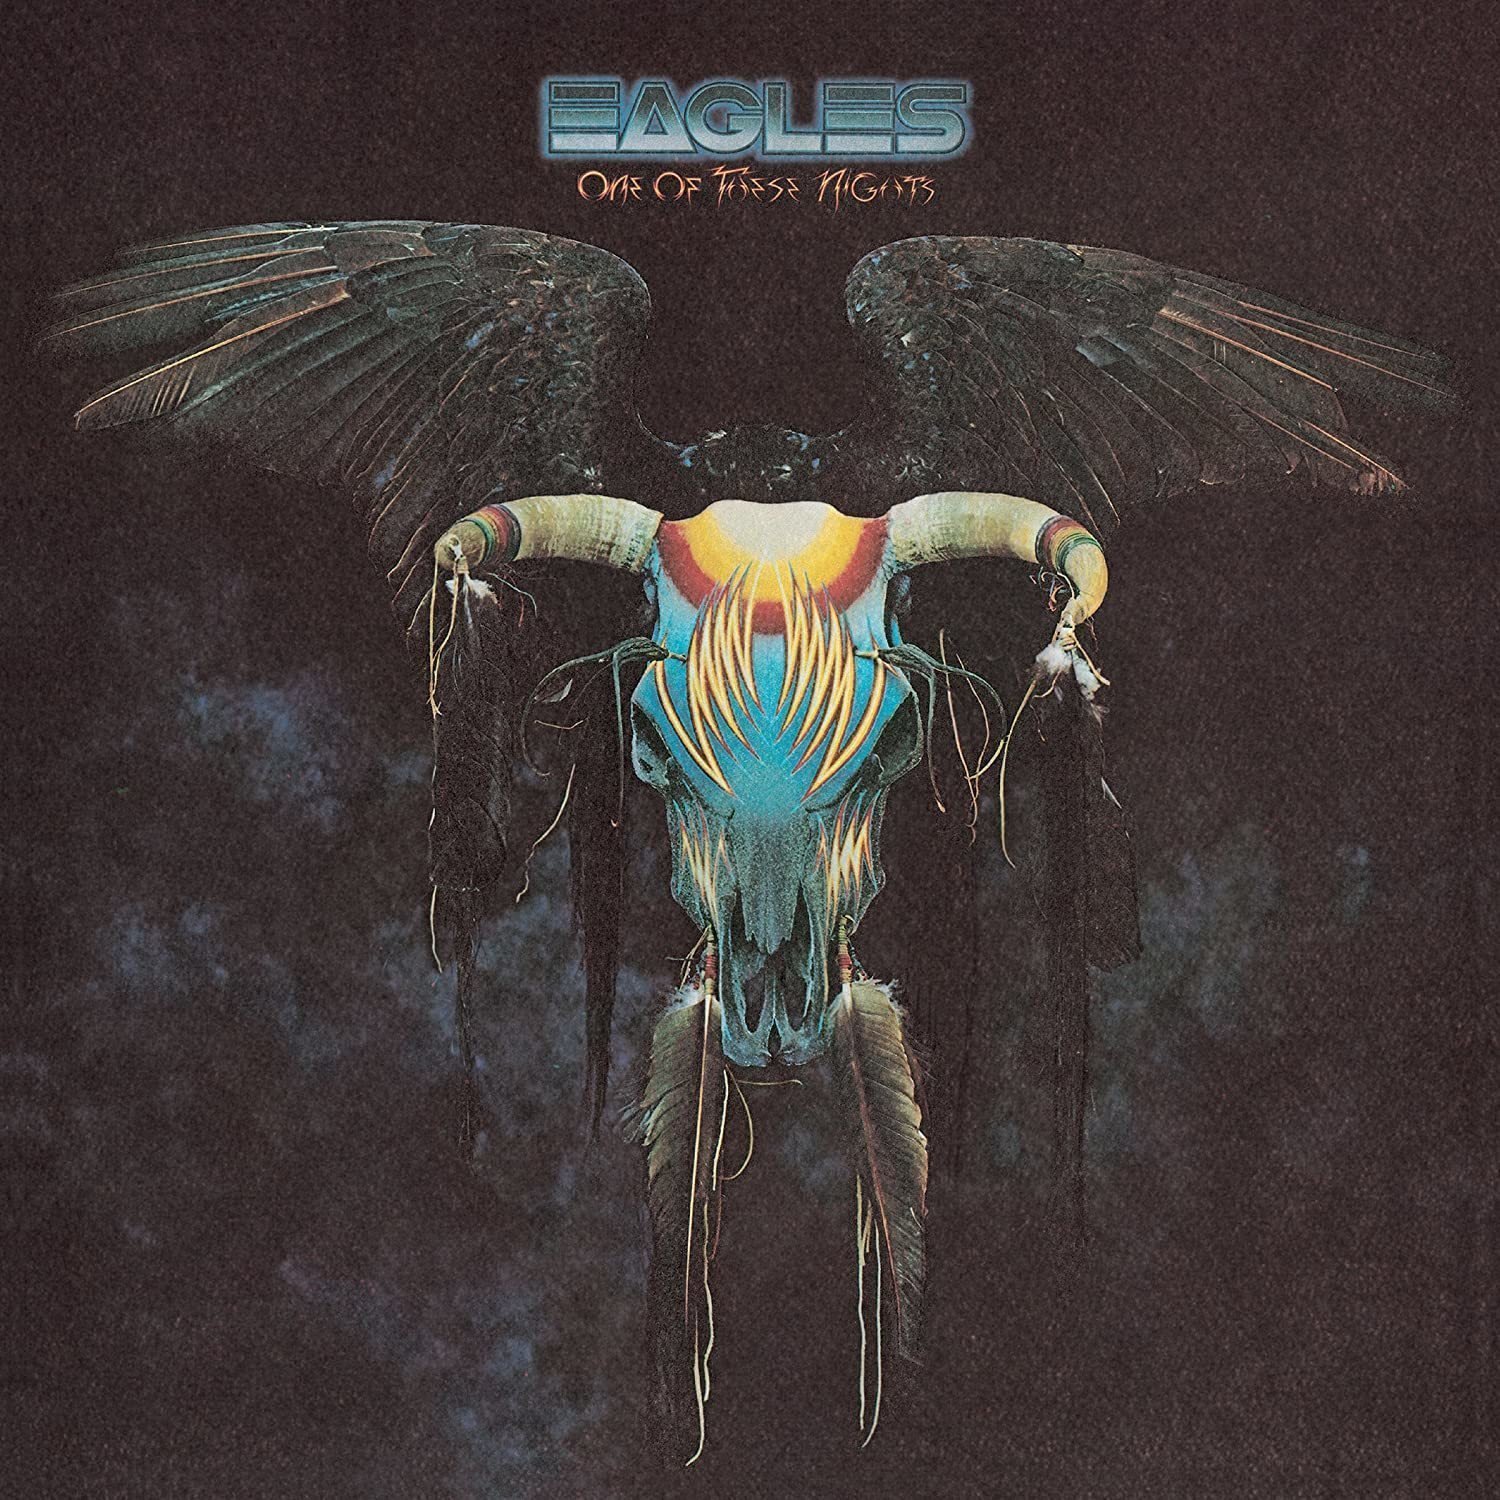 Disco de vinil Eagles - One Of These Nights (LP)